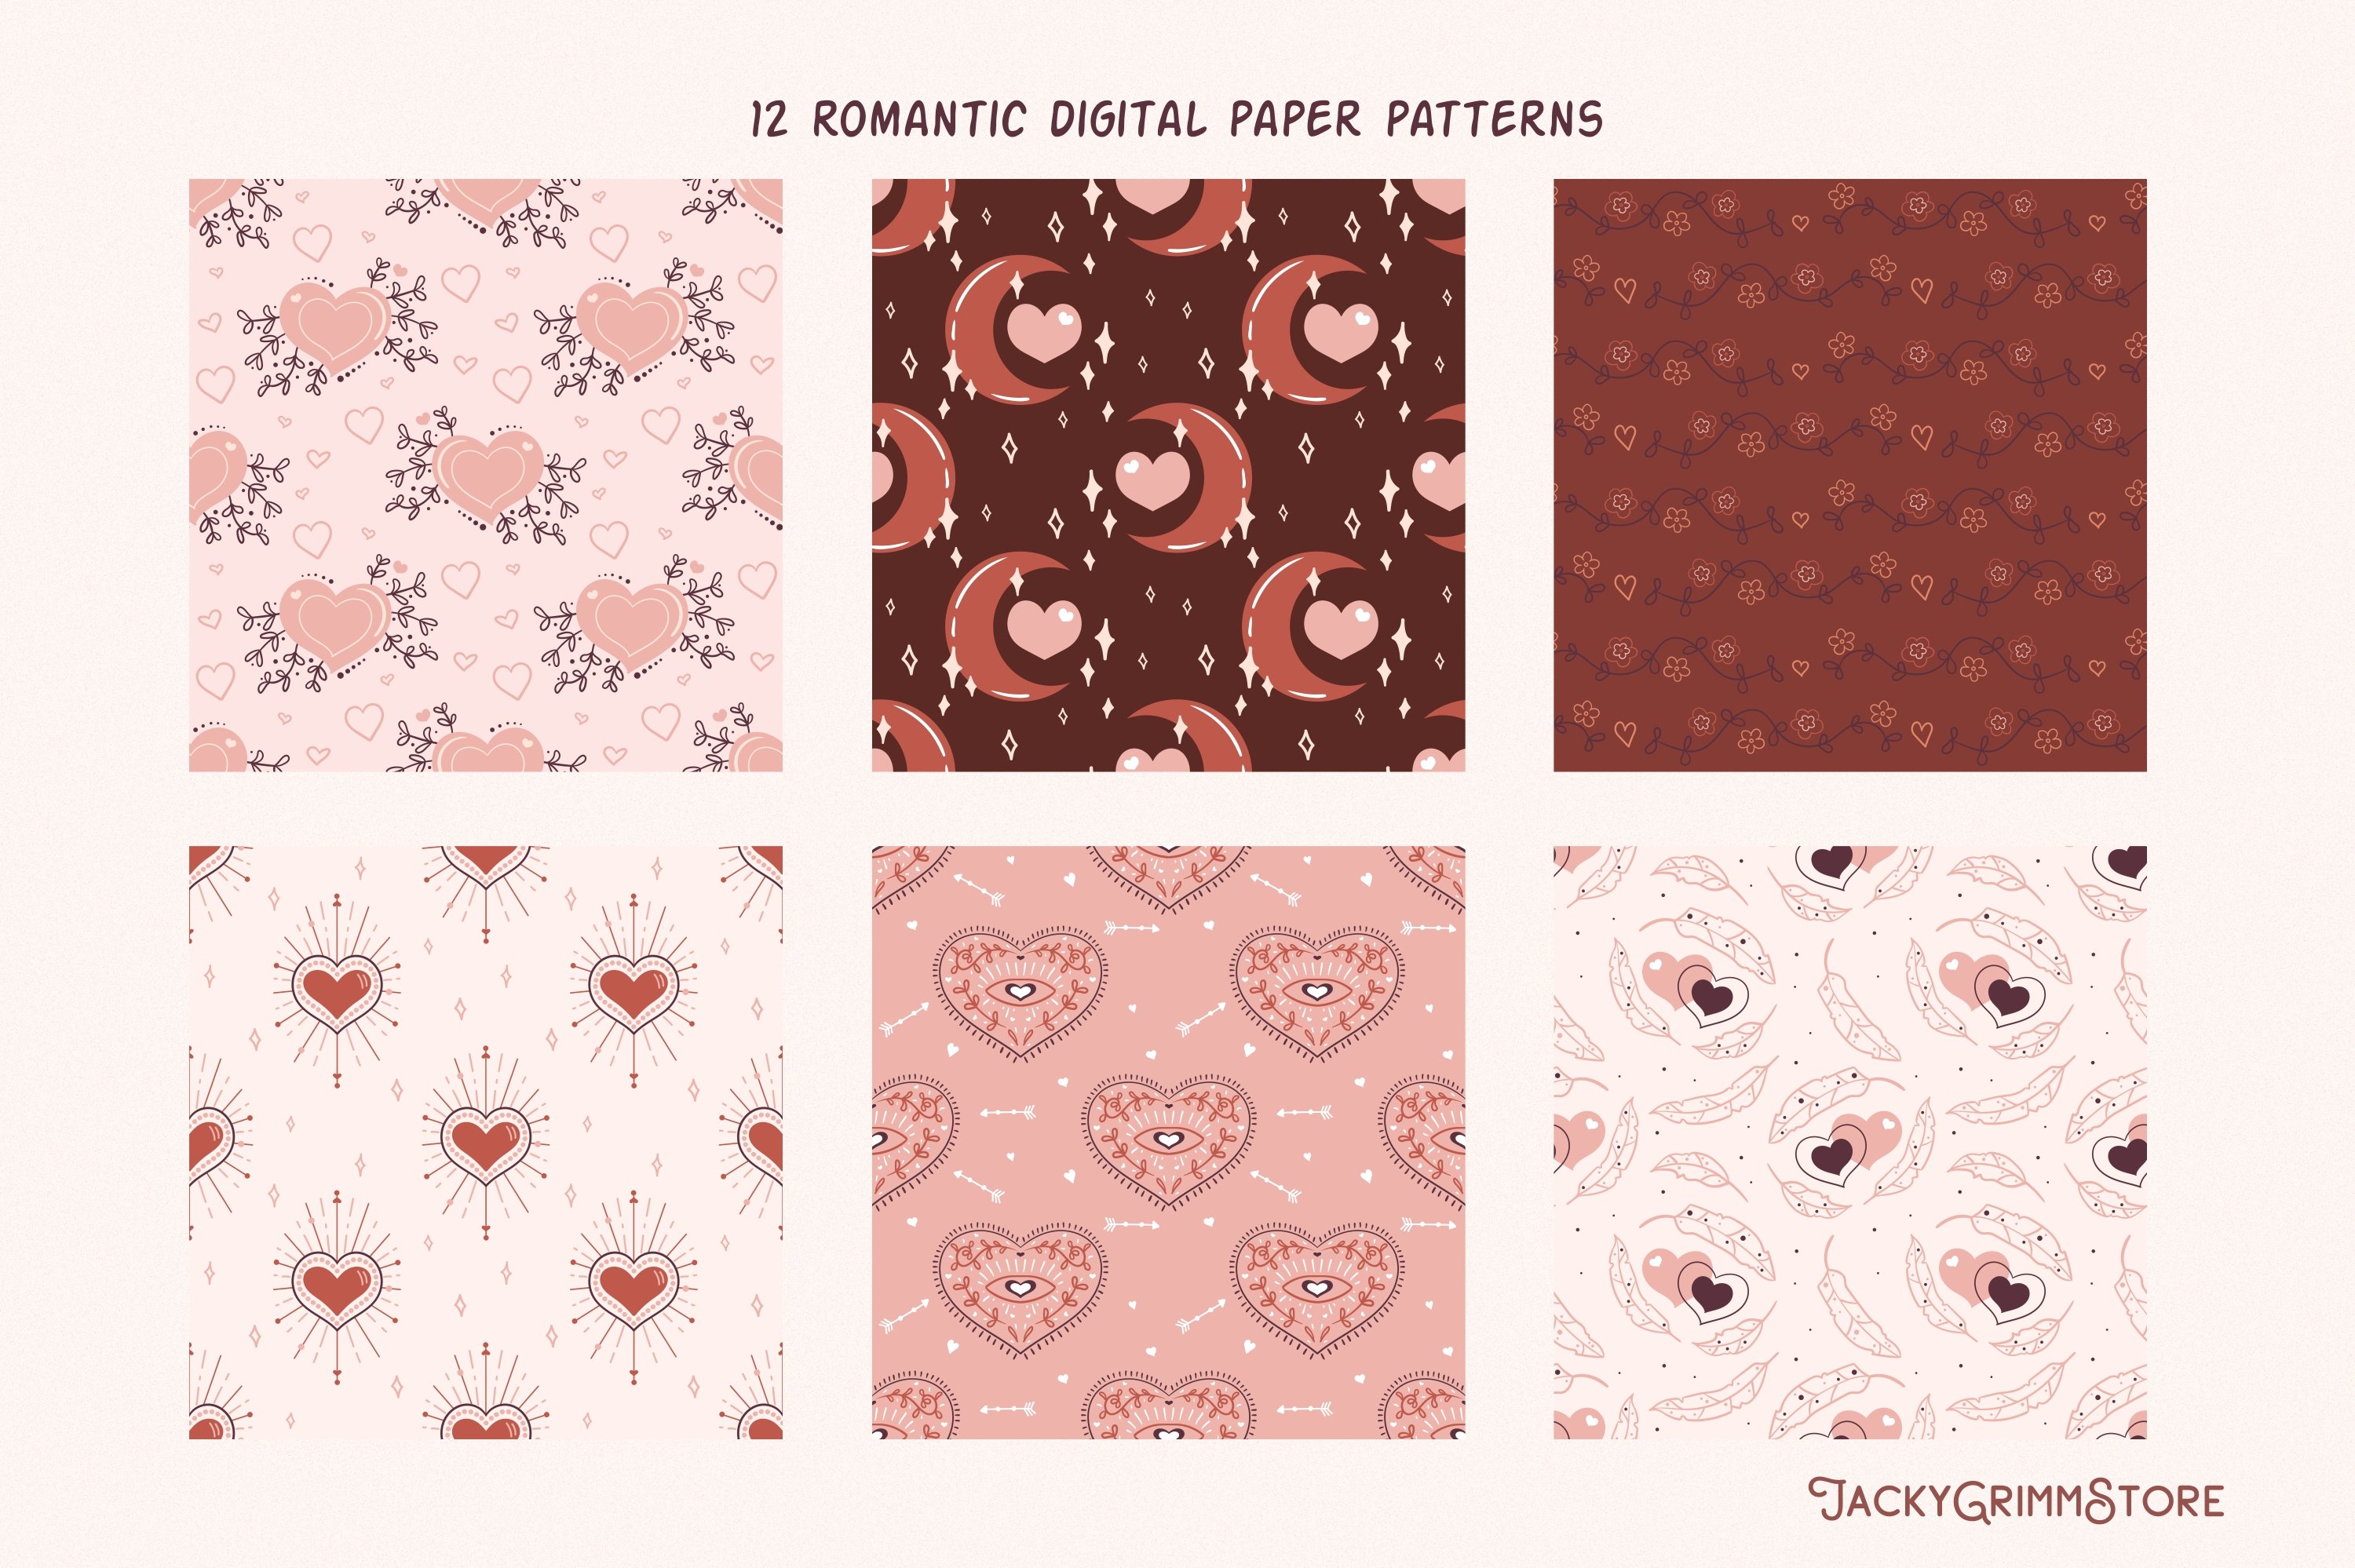 Some Valentines'a patterns in pastel colors.